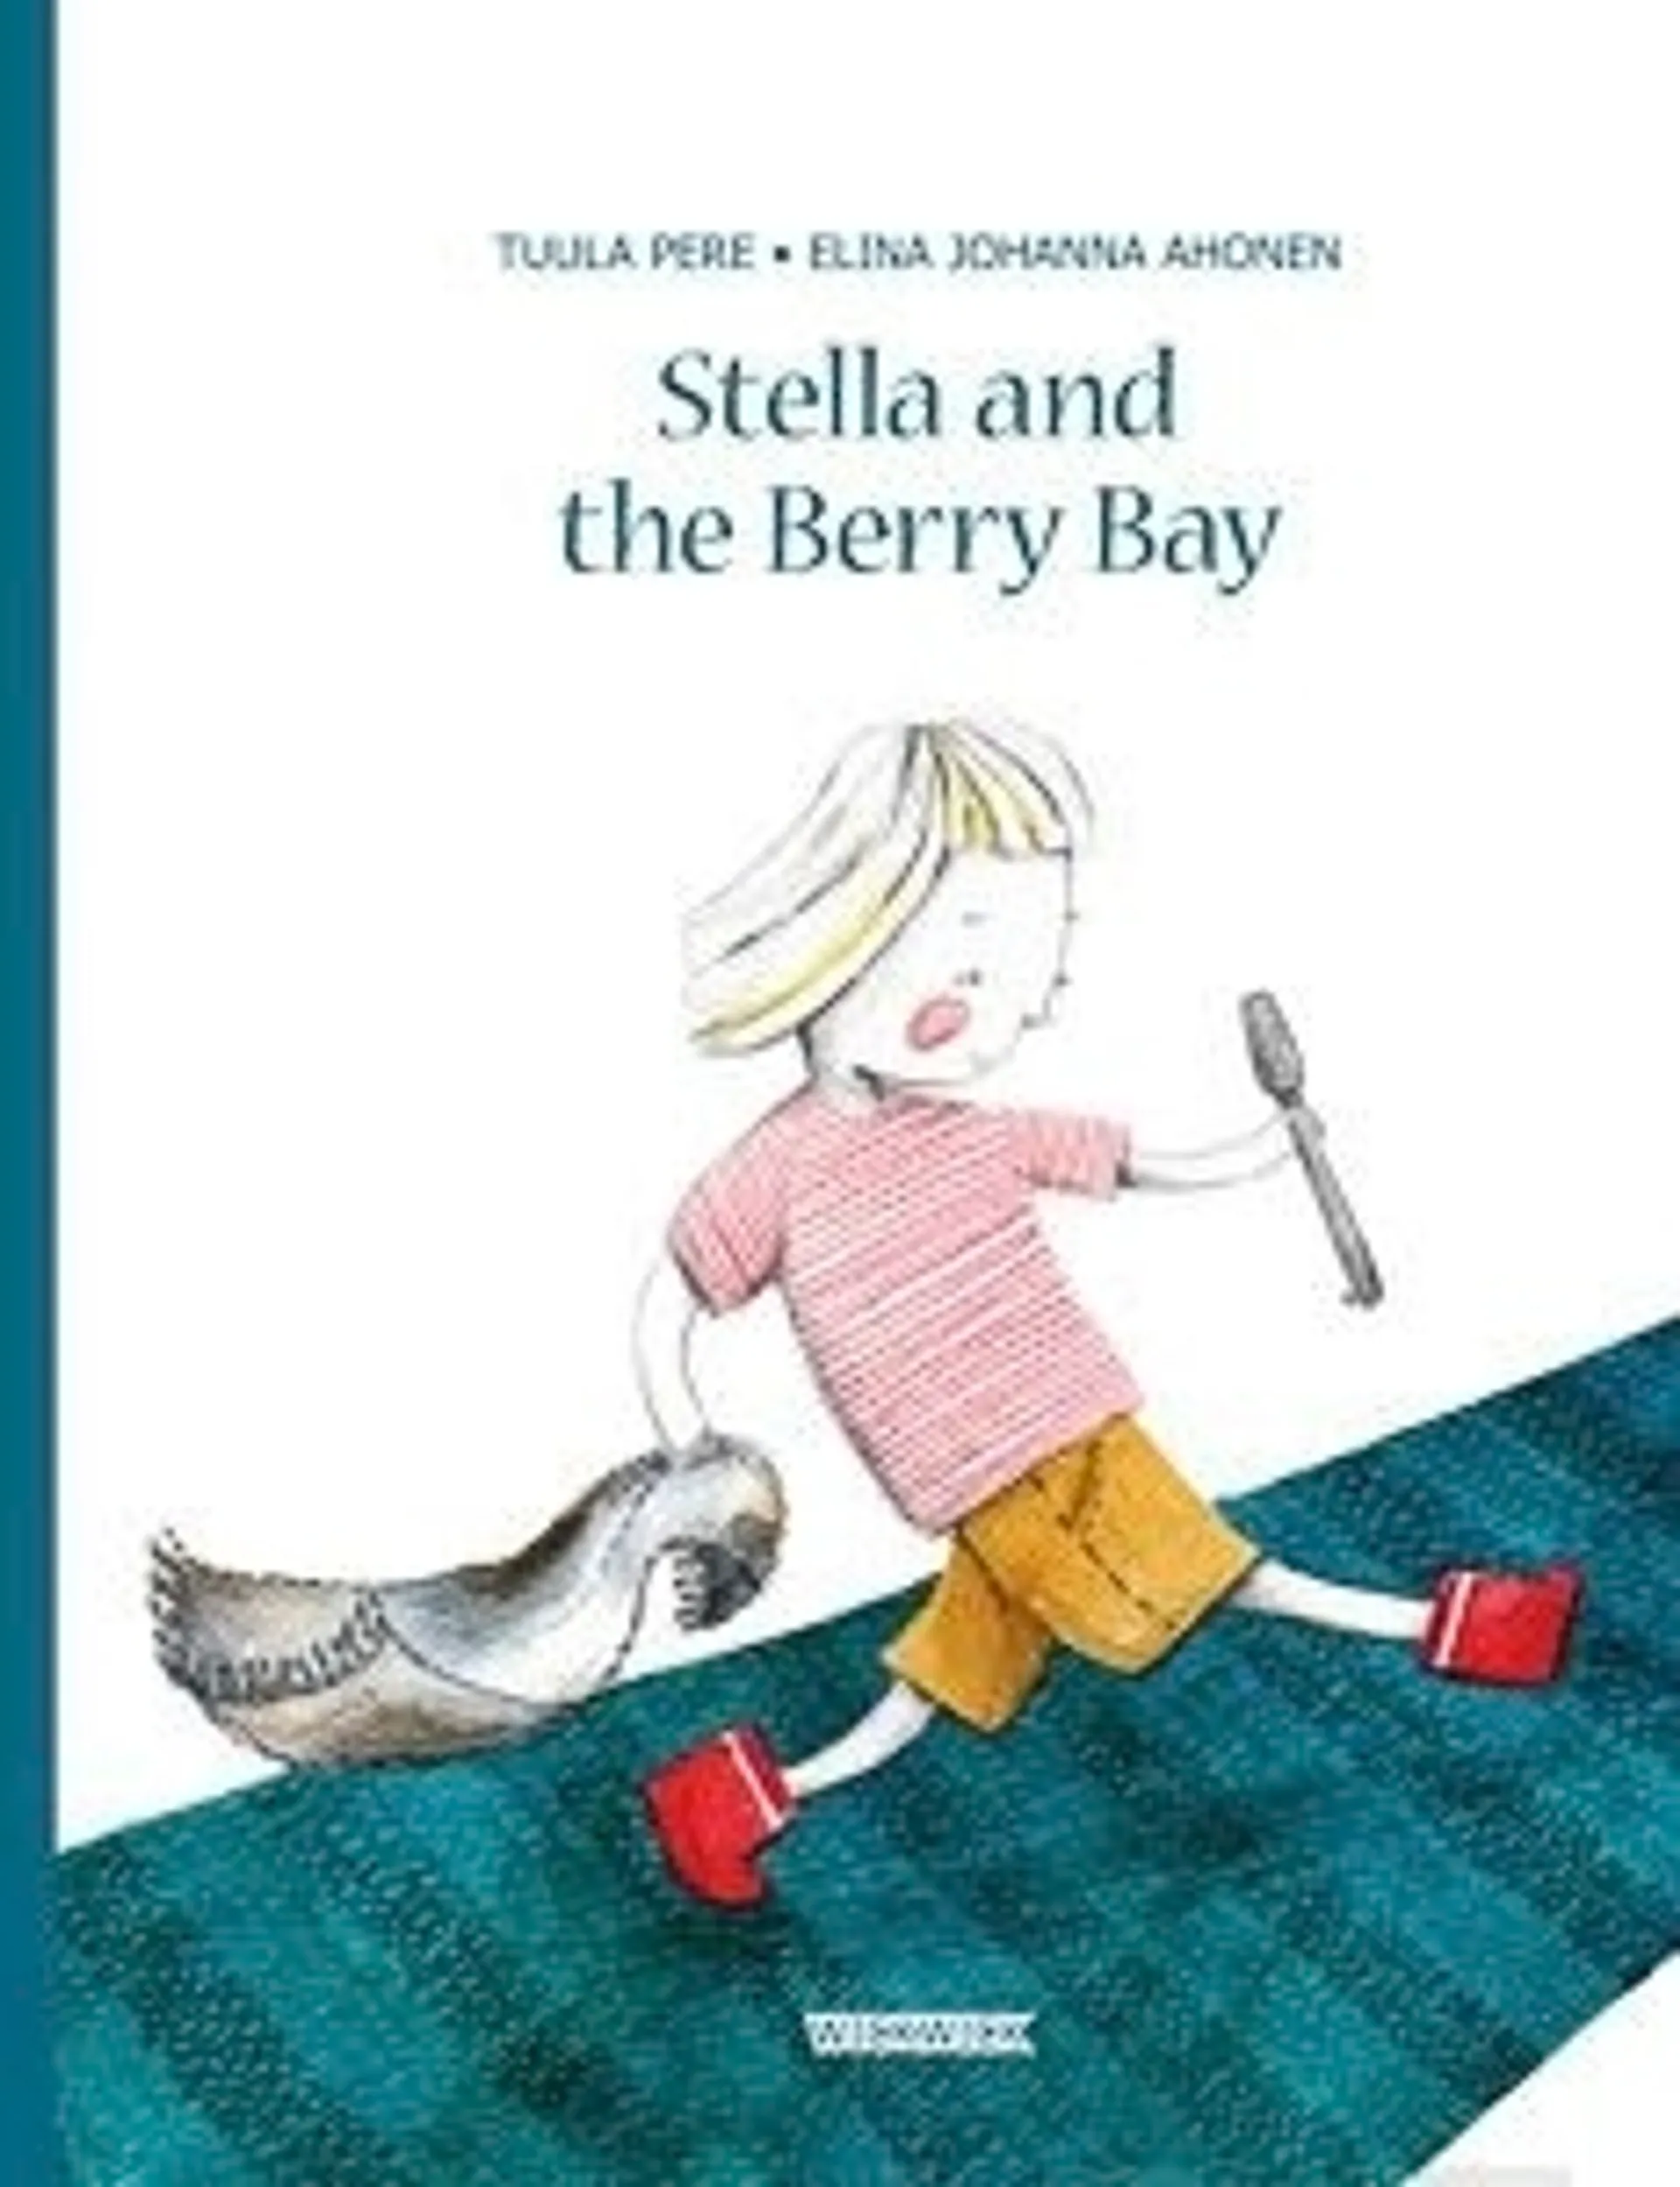 Pere, Stella and the Berry Bay